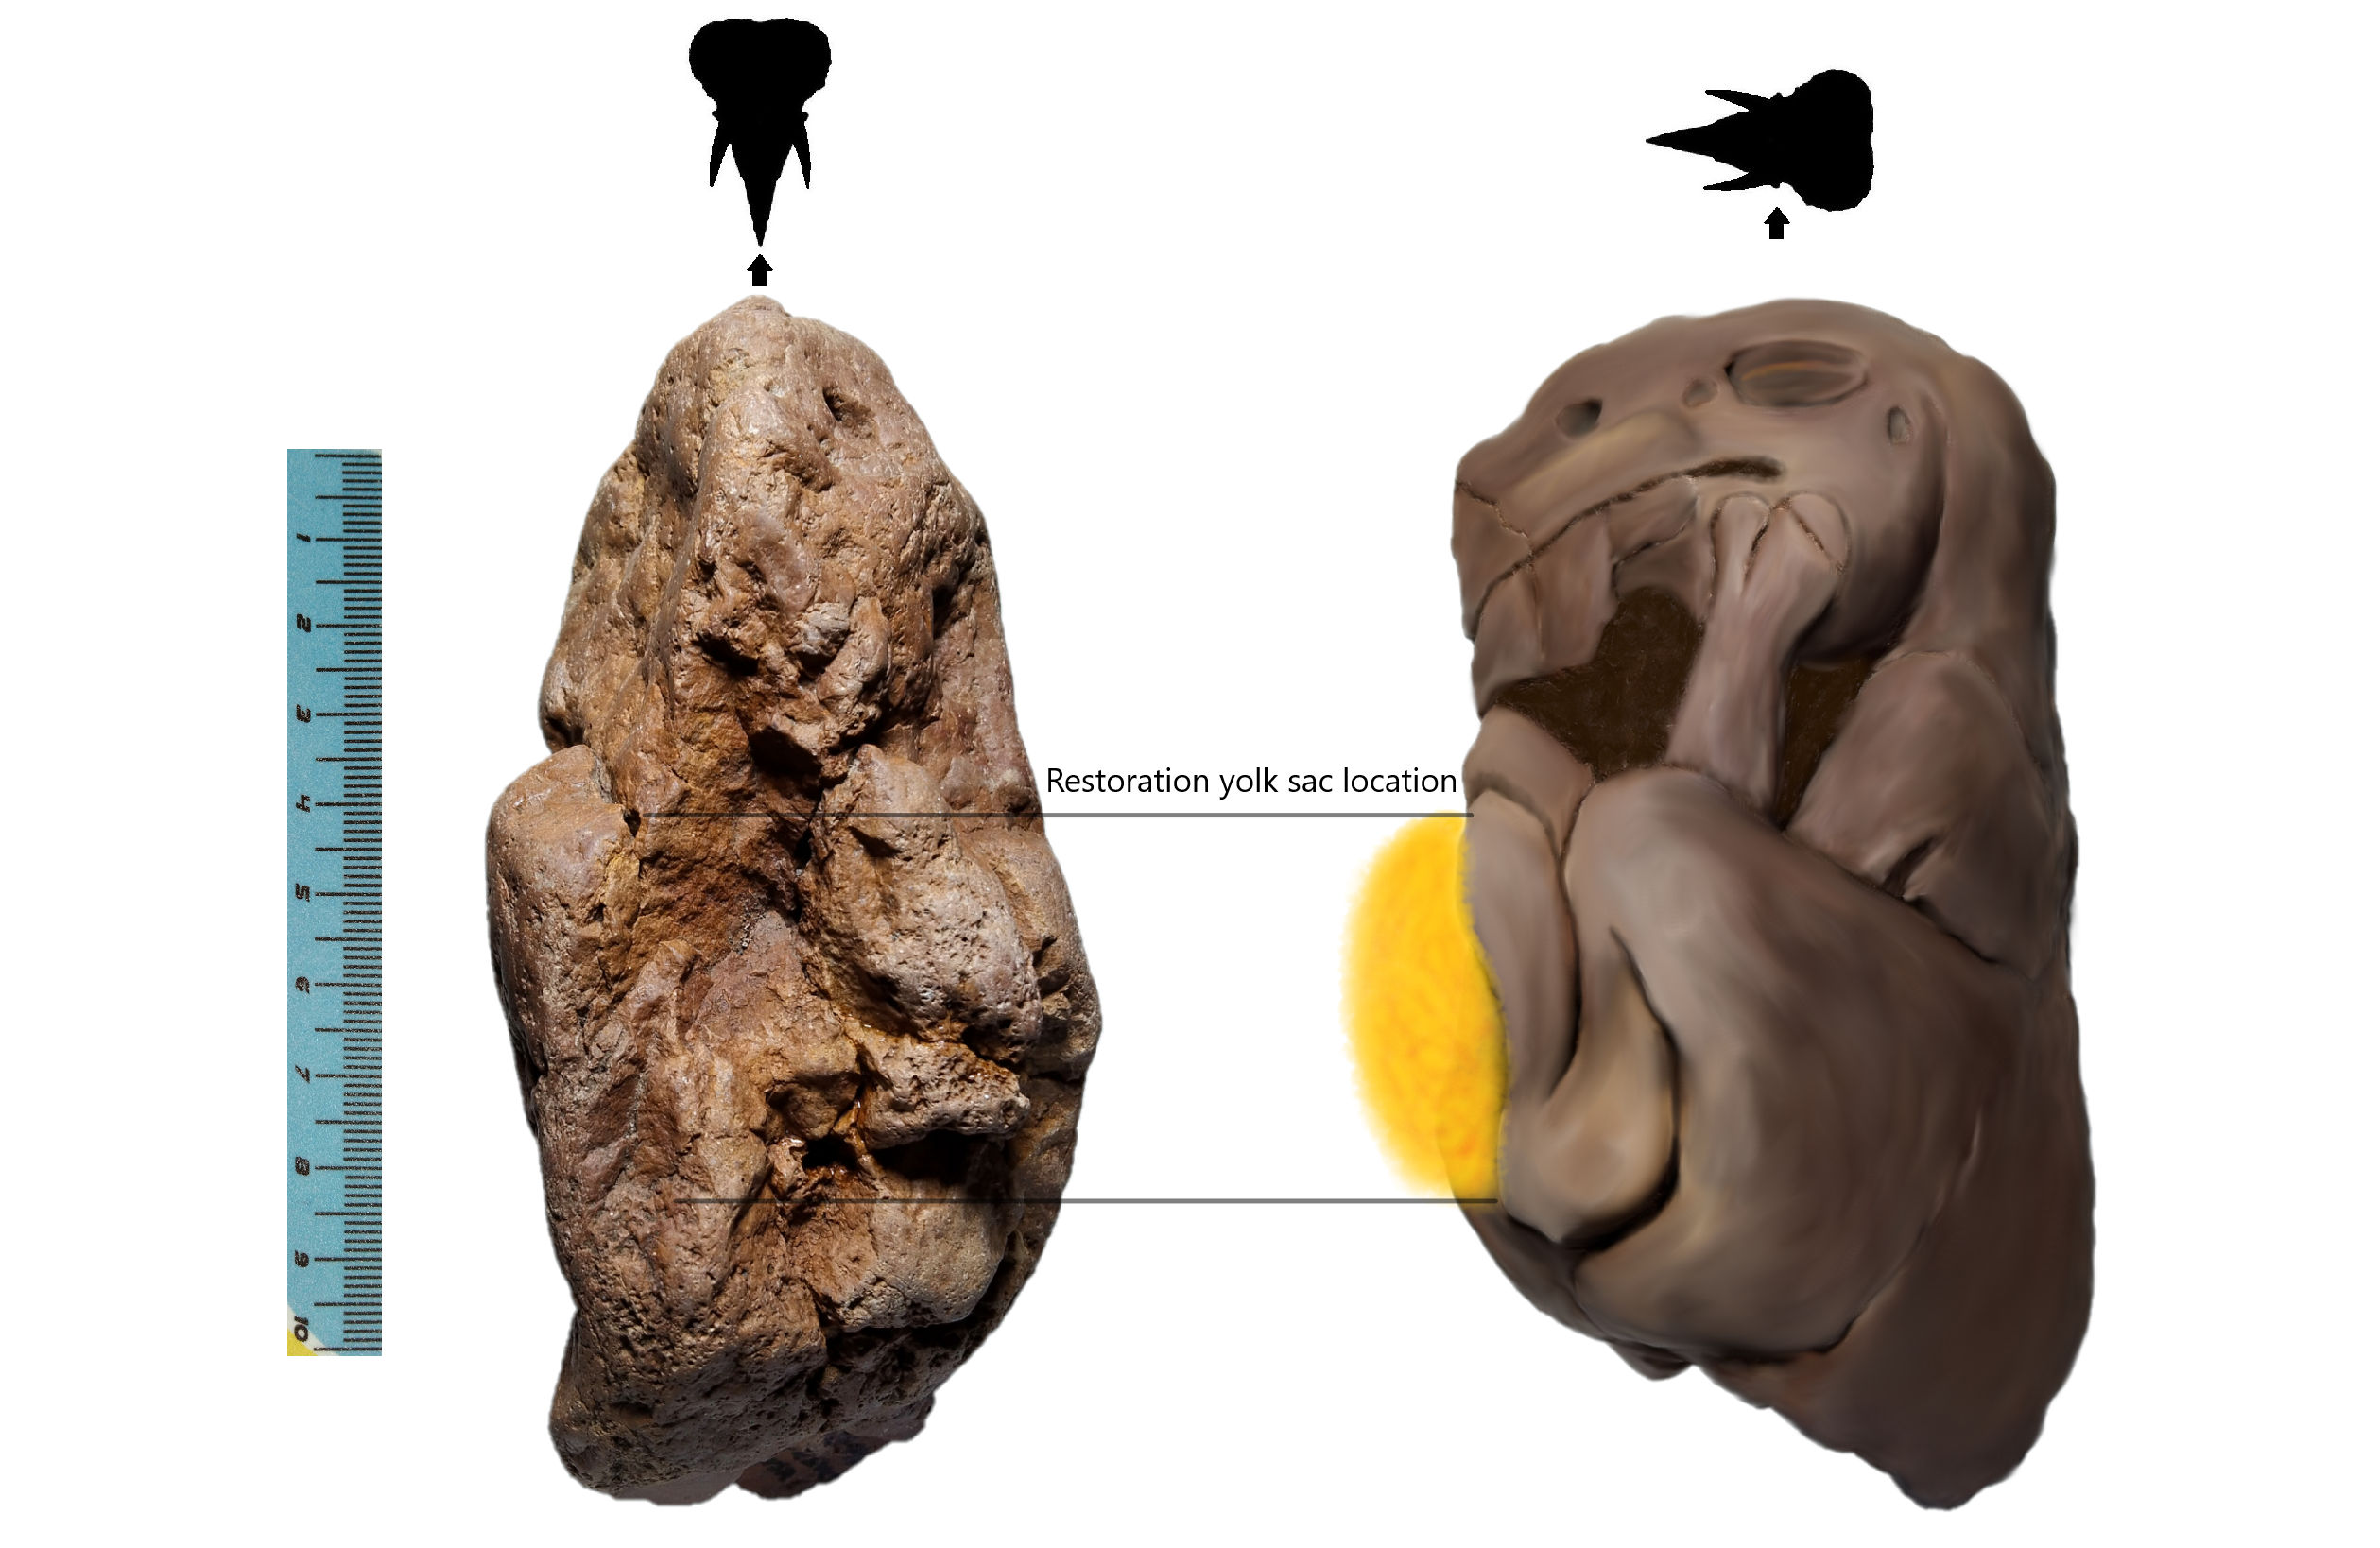 Figure 8. A reconstructed image of Brachylophosaurus embryo with its unabsorbed yolk sac locate above the abdomen. The yolk sac located area also can be roughly observed in the front view of the embryo (left image) that shows some trace of small hole. This specimen no longer preserved its yolk sac as already decayed before fully fossilized. Yolk sac contains large amount of fluid that sometimes slow the transformation into Dry Mass that has high resistance to corrosion before turn into fossil. The hypothesis of Dry Mass Fossilization please refer volume 4. (scale bar in cm)